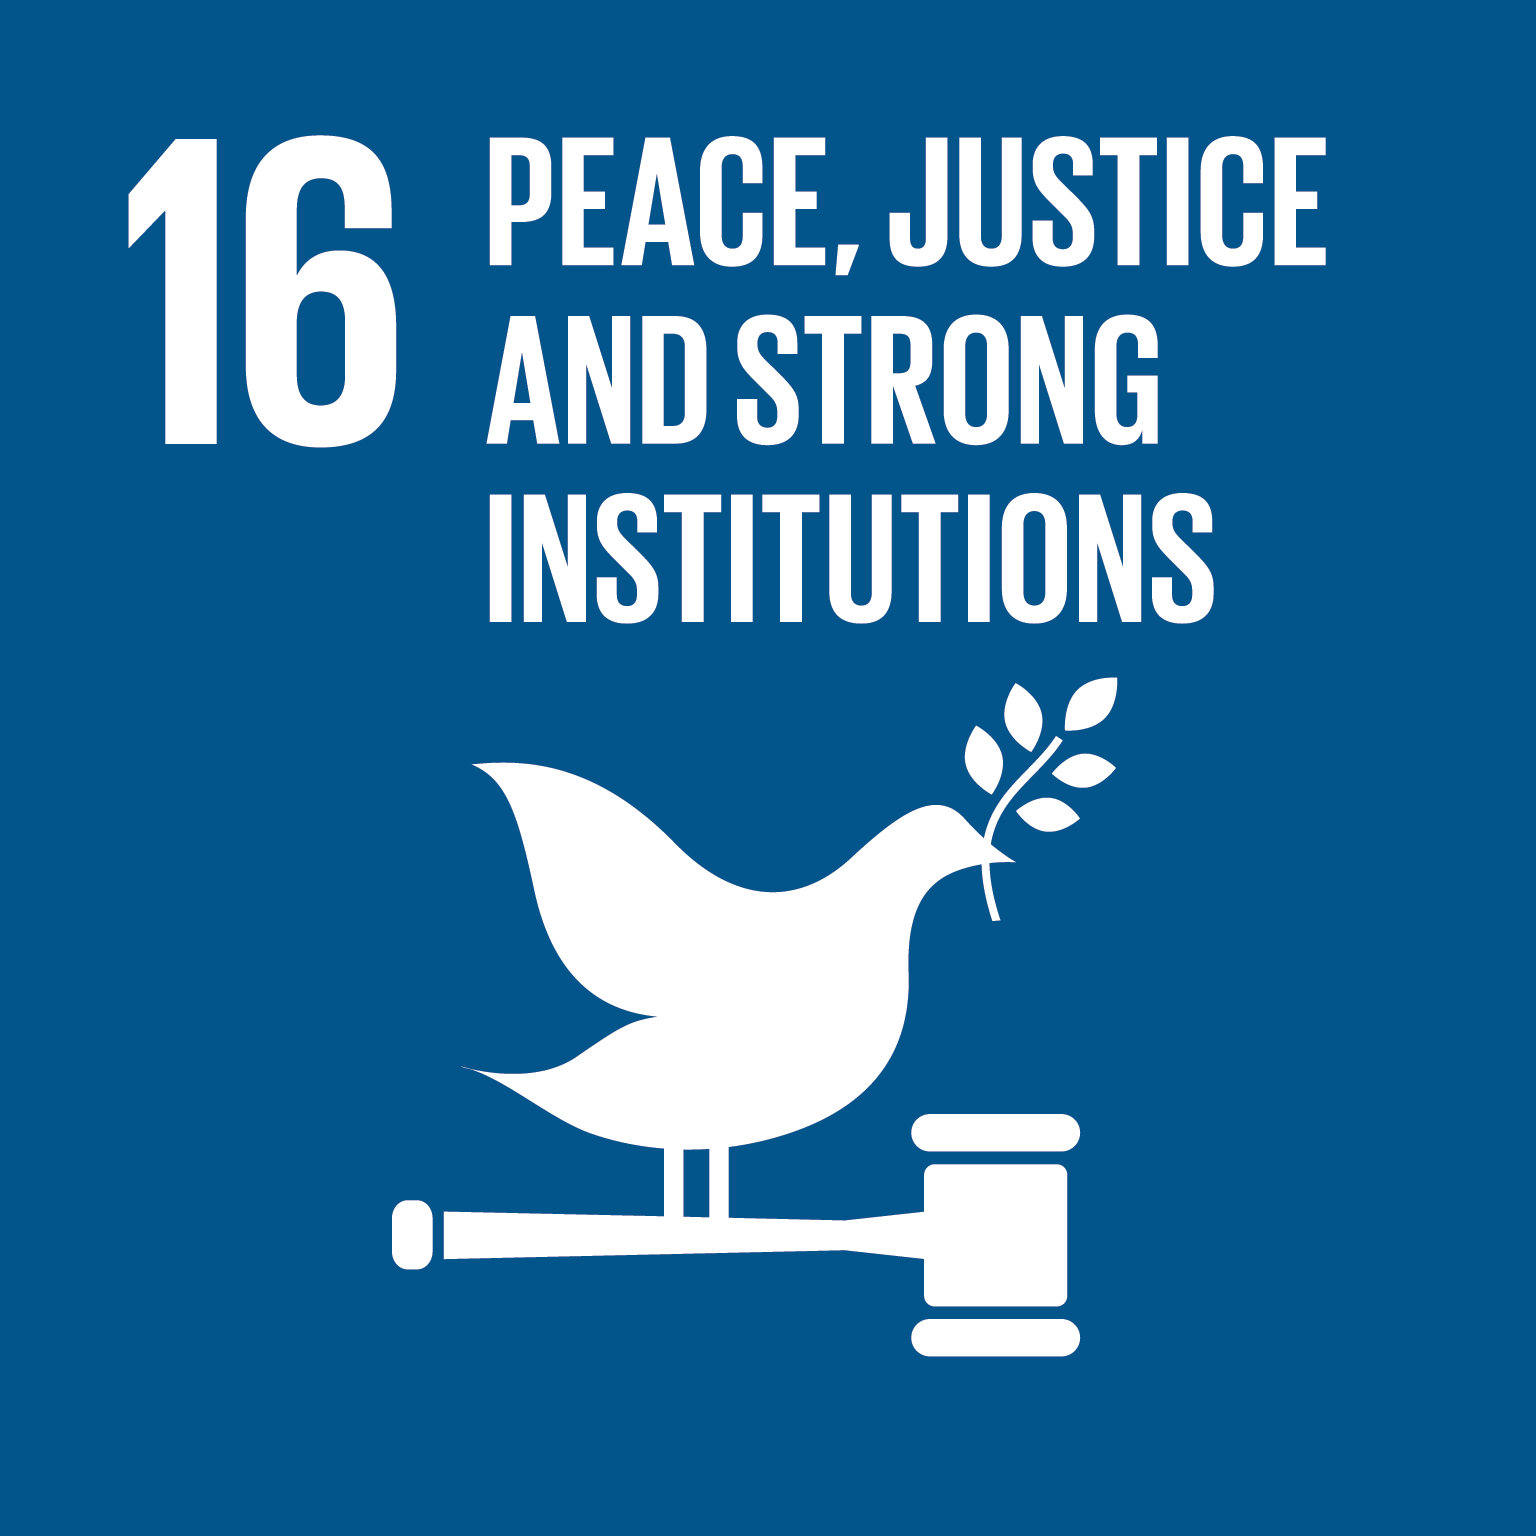 16 - peace justice and strong institutions